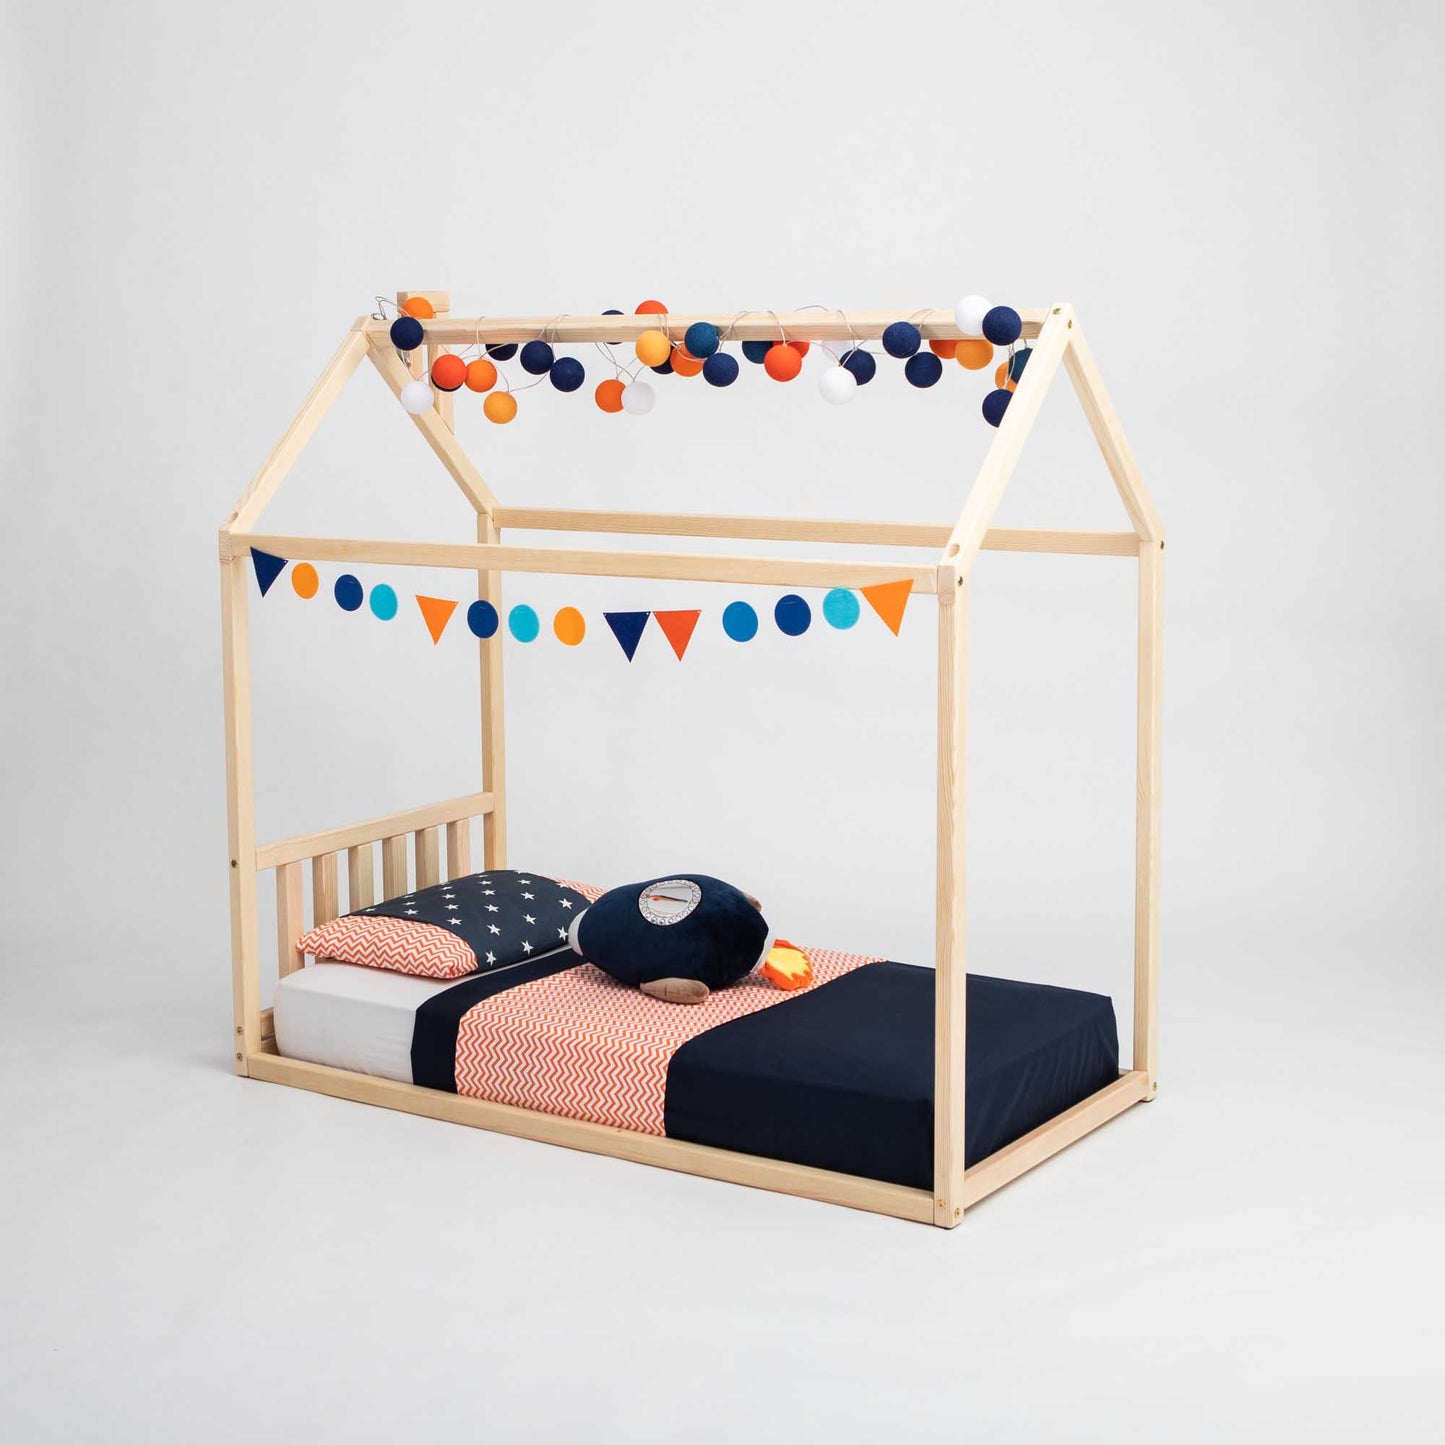 A cozy House-frame bed with a headboard from Sweet Home From Wood, made of wood and adorned with pom poms.